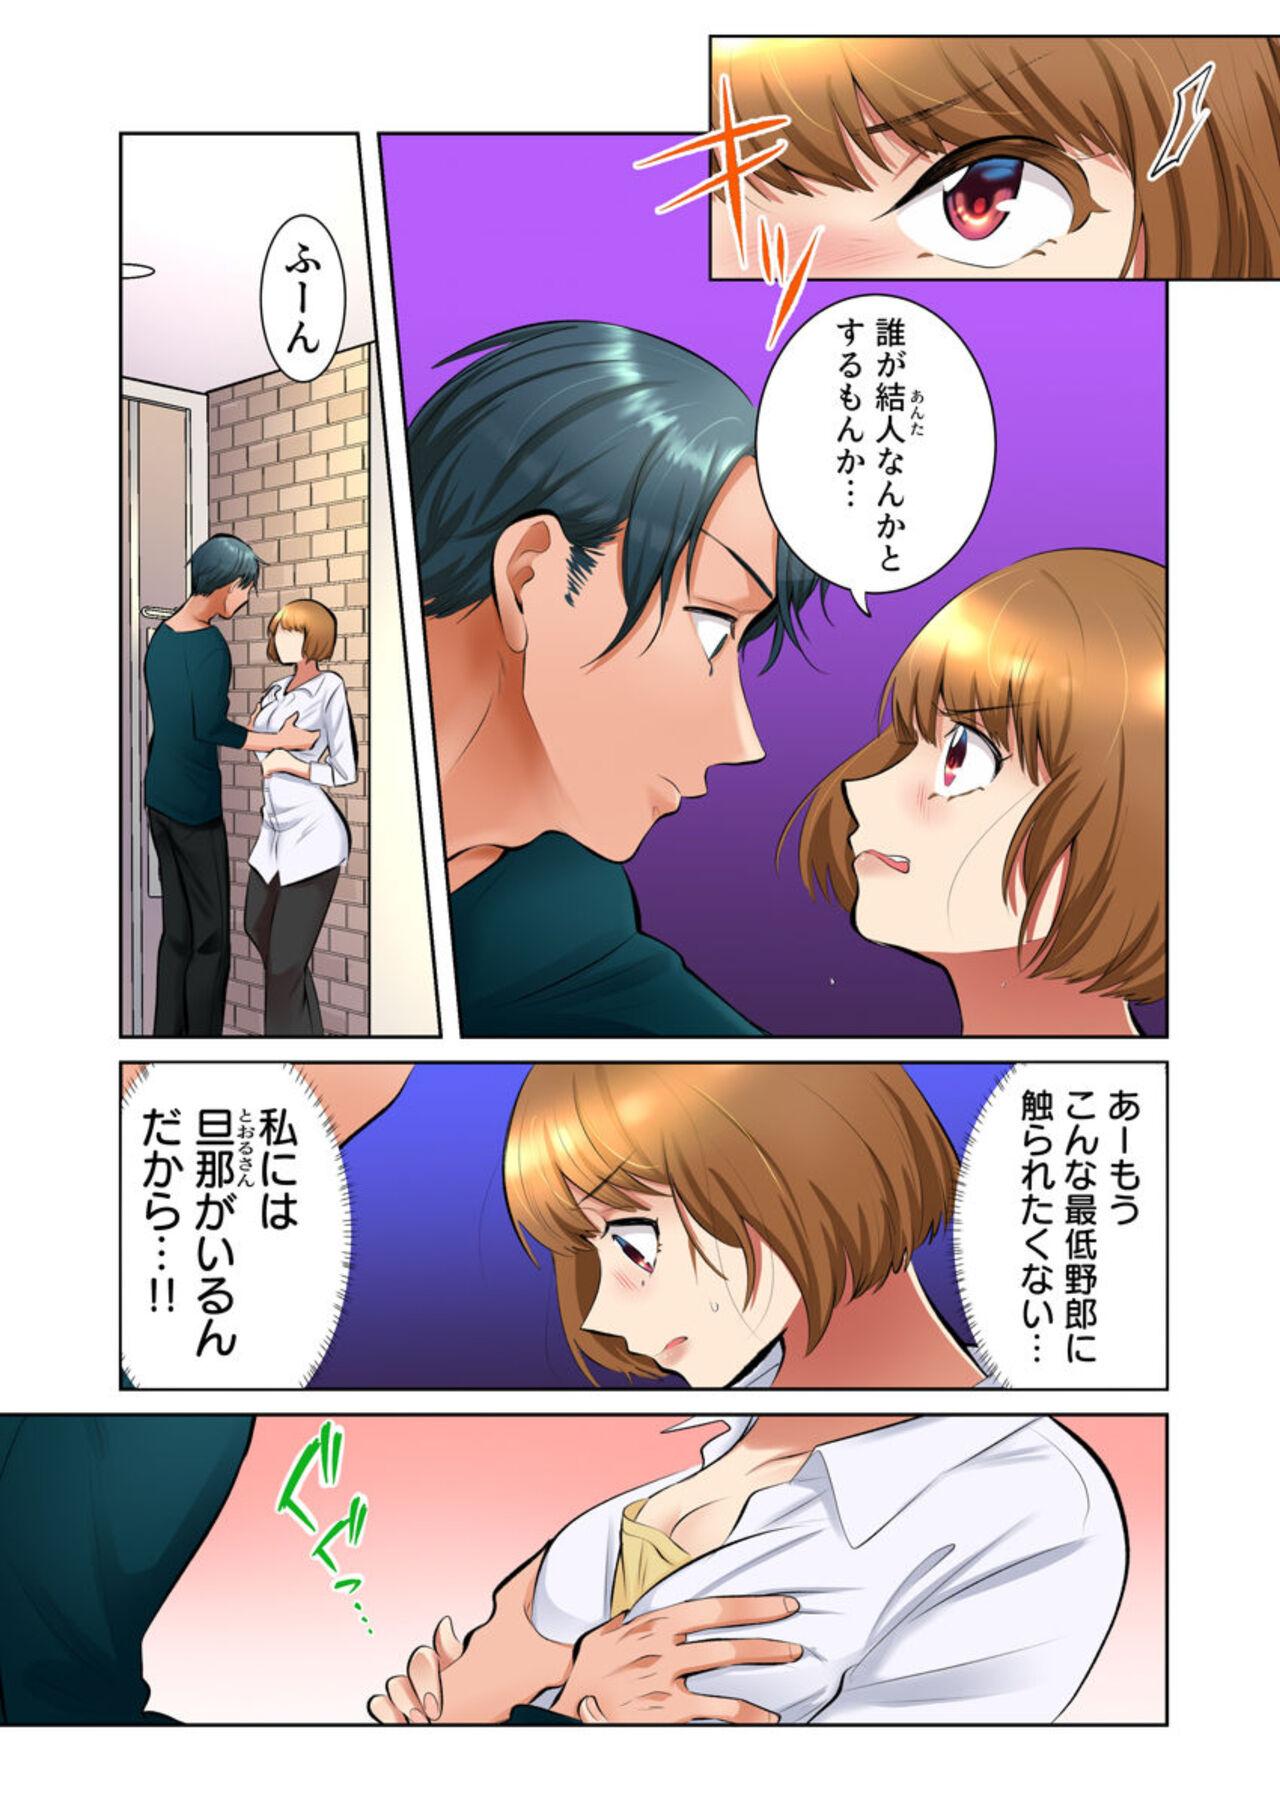 Ball Busting [Ika Hotaru] My Neighbor Is A Sadistic Ex-Boyfriend ~I Love My Husband, But My Aching Body Has Been Redeveloped~ (Full Color) 2 Australian - Picture 3